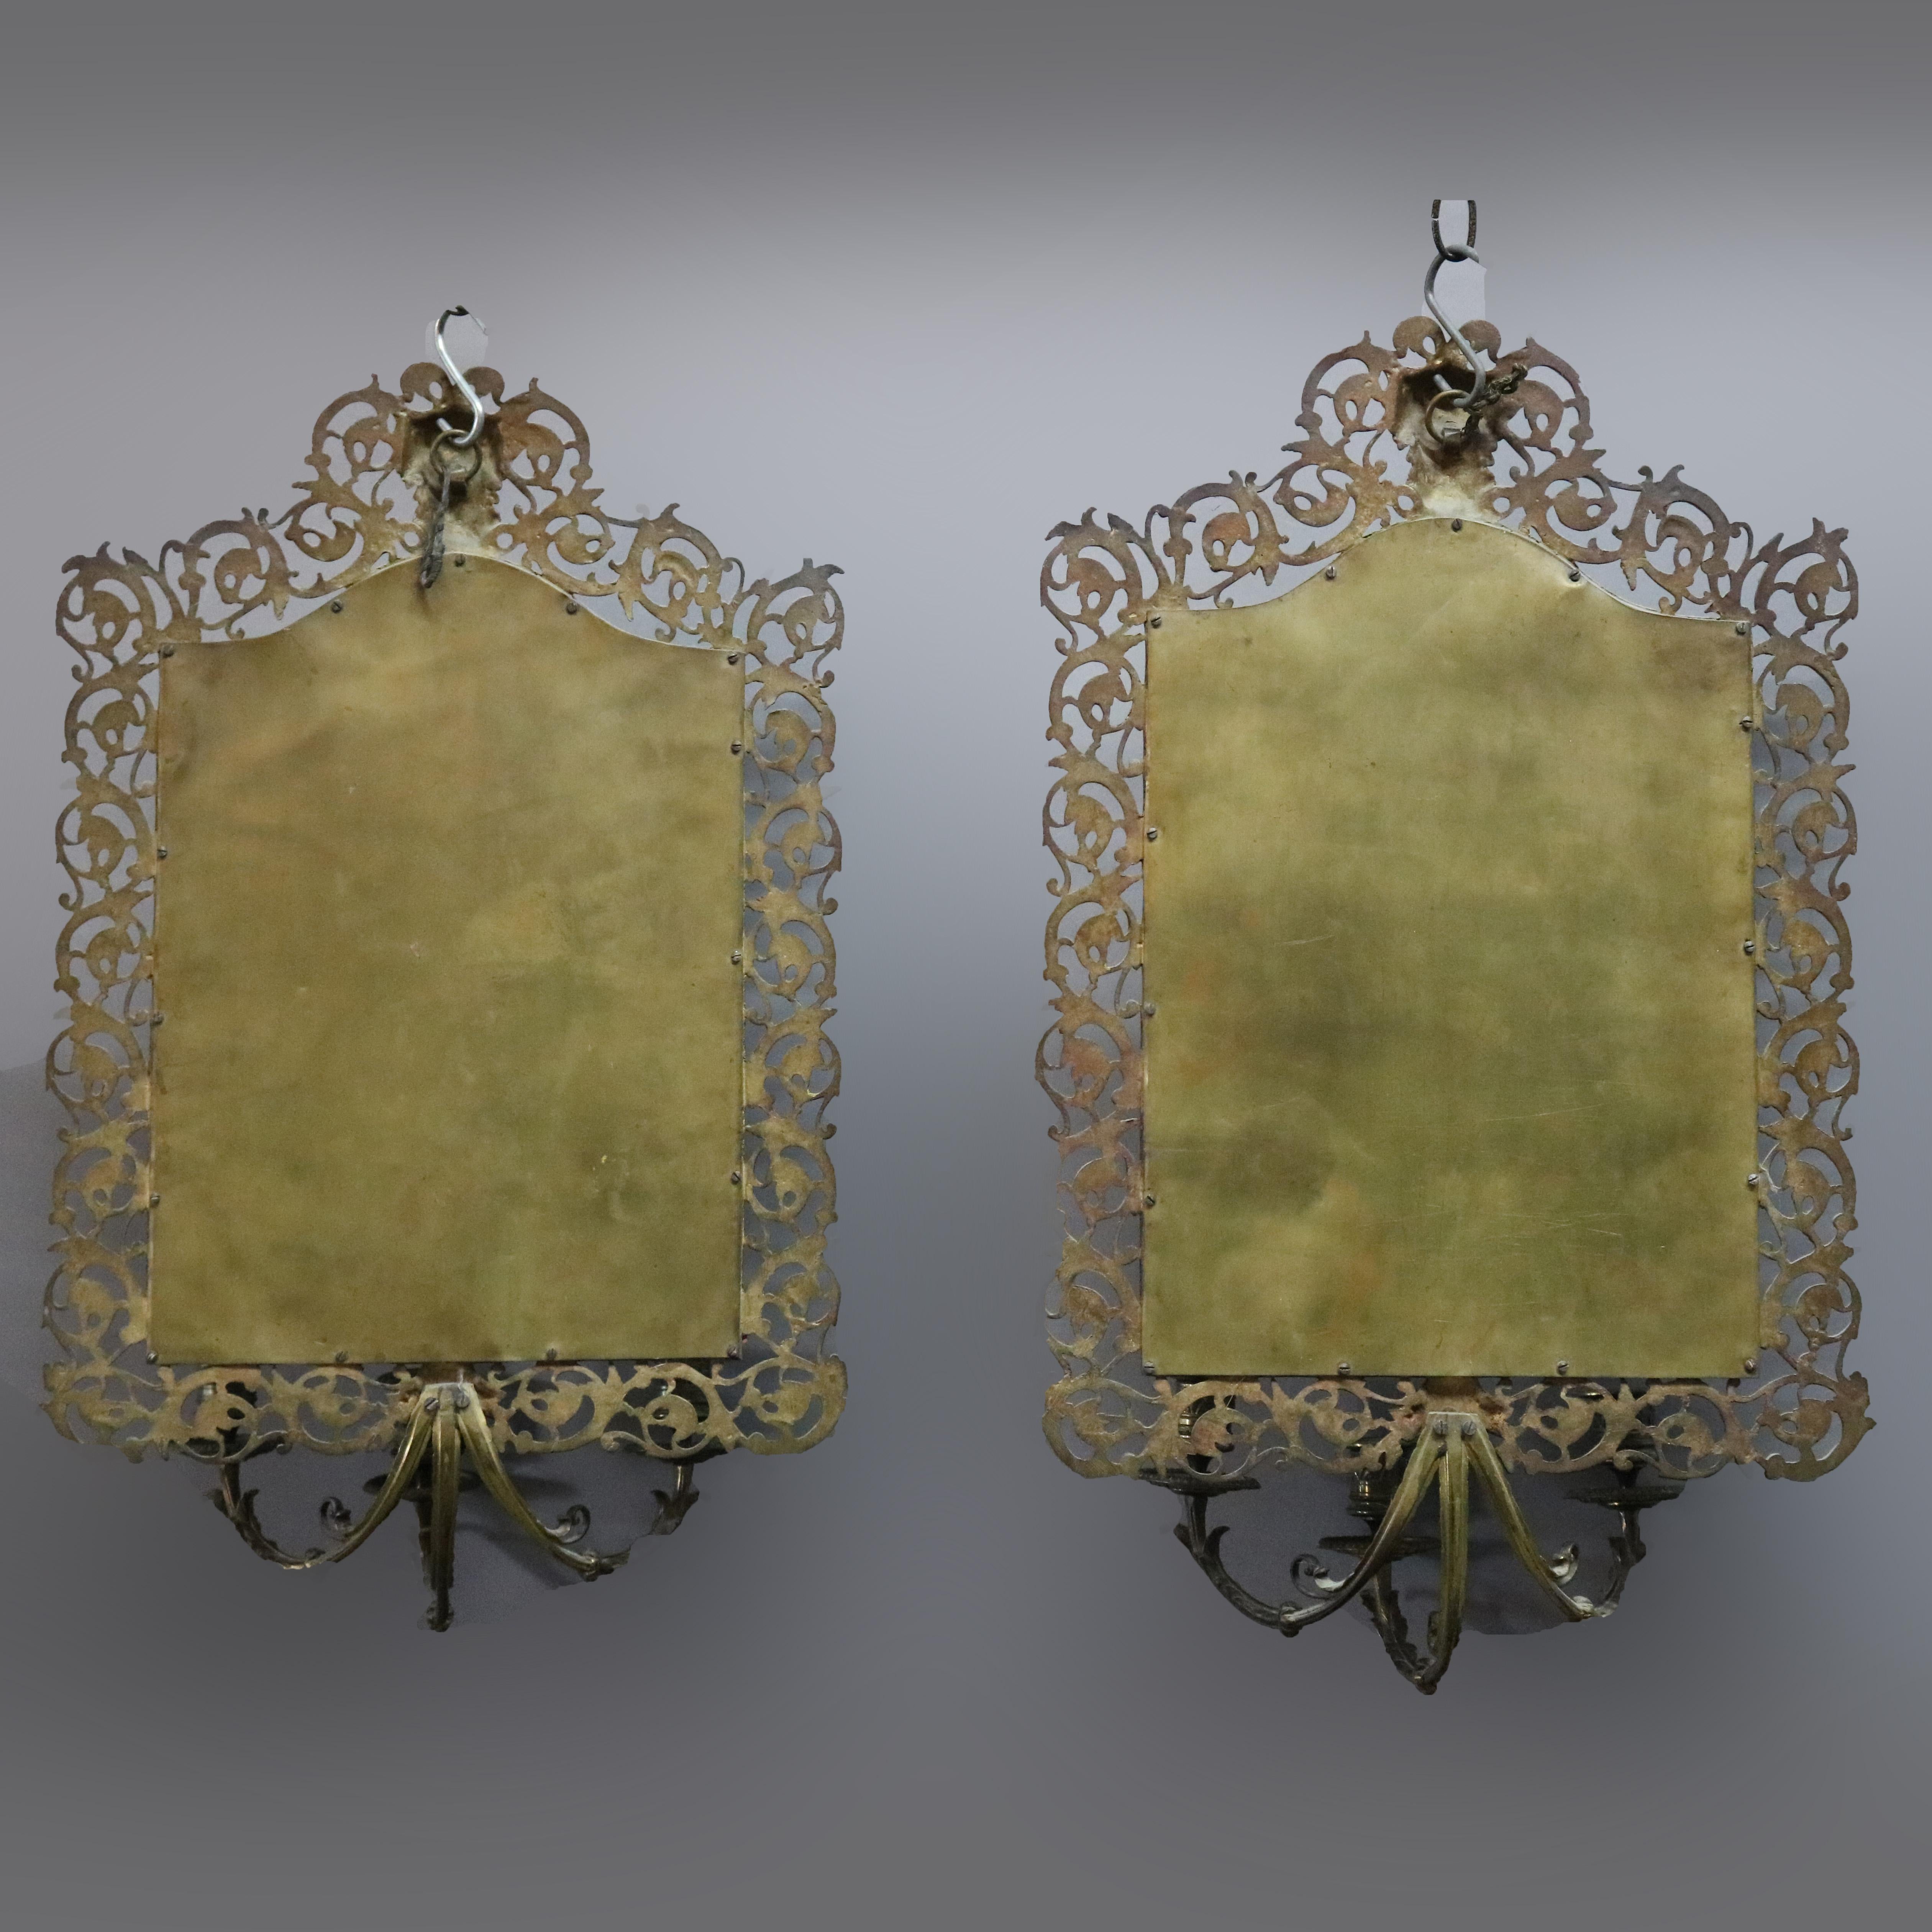 Antique Oversized Figural Bronze Baroque Mirrored Candle Wall Sconces circa 1890 6